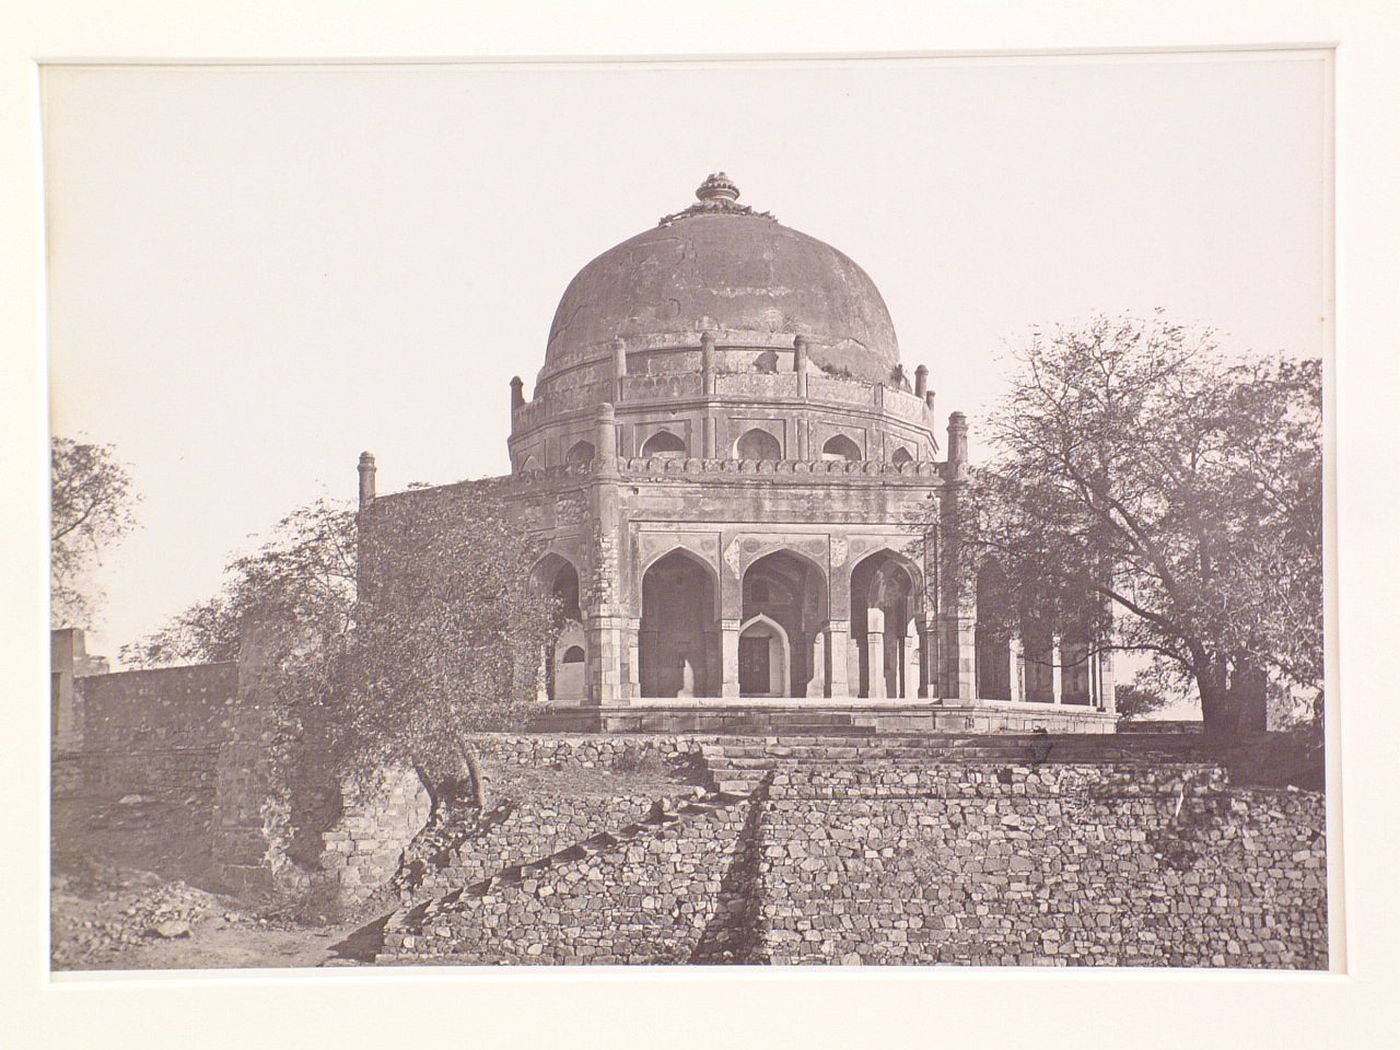 View of the Tomb of Adham Khan, Delhi, India